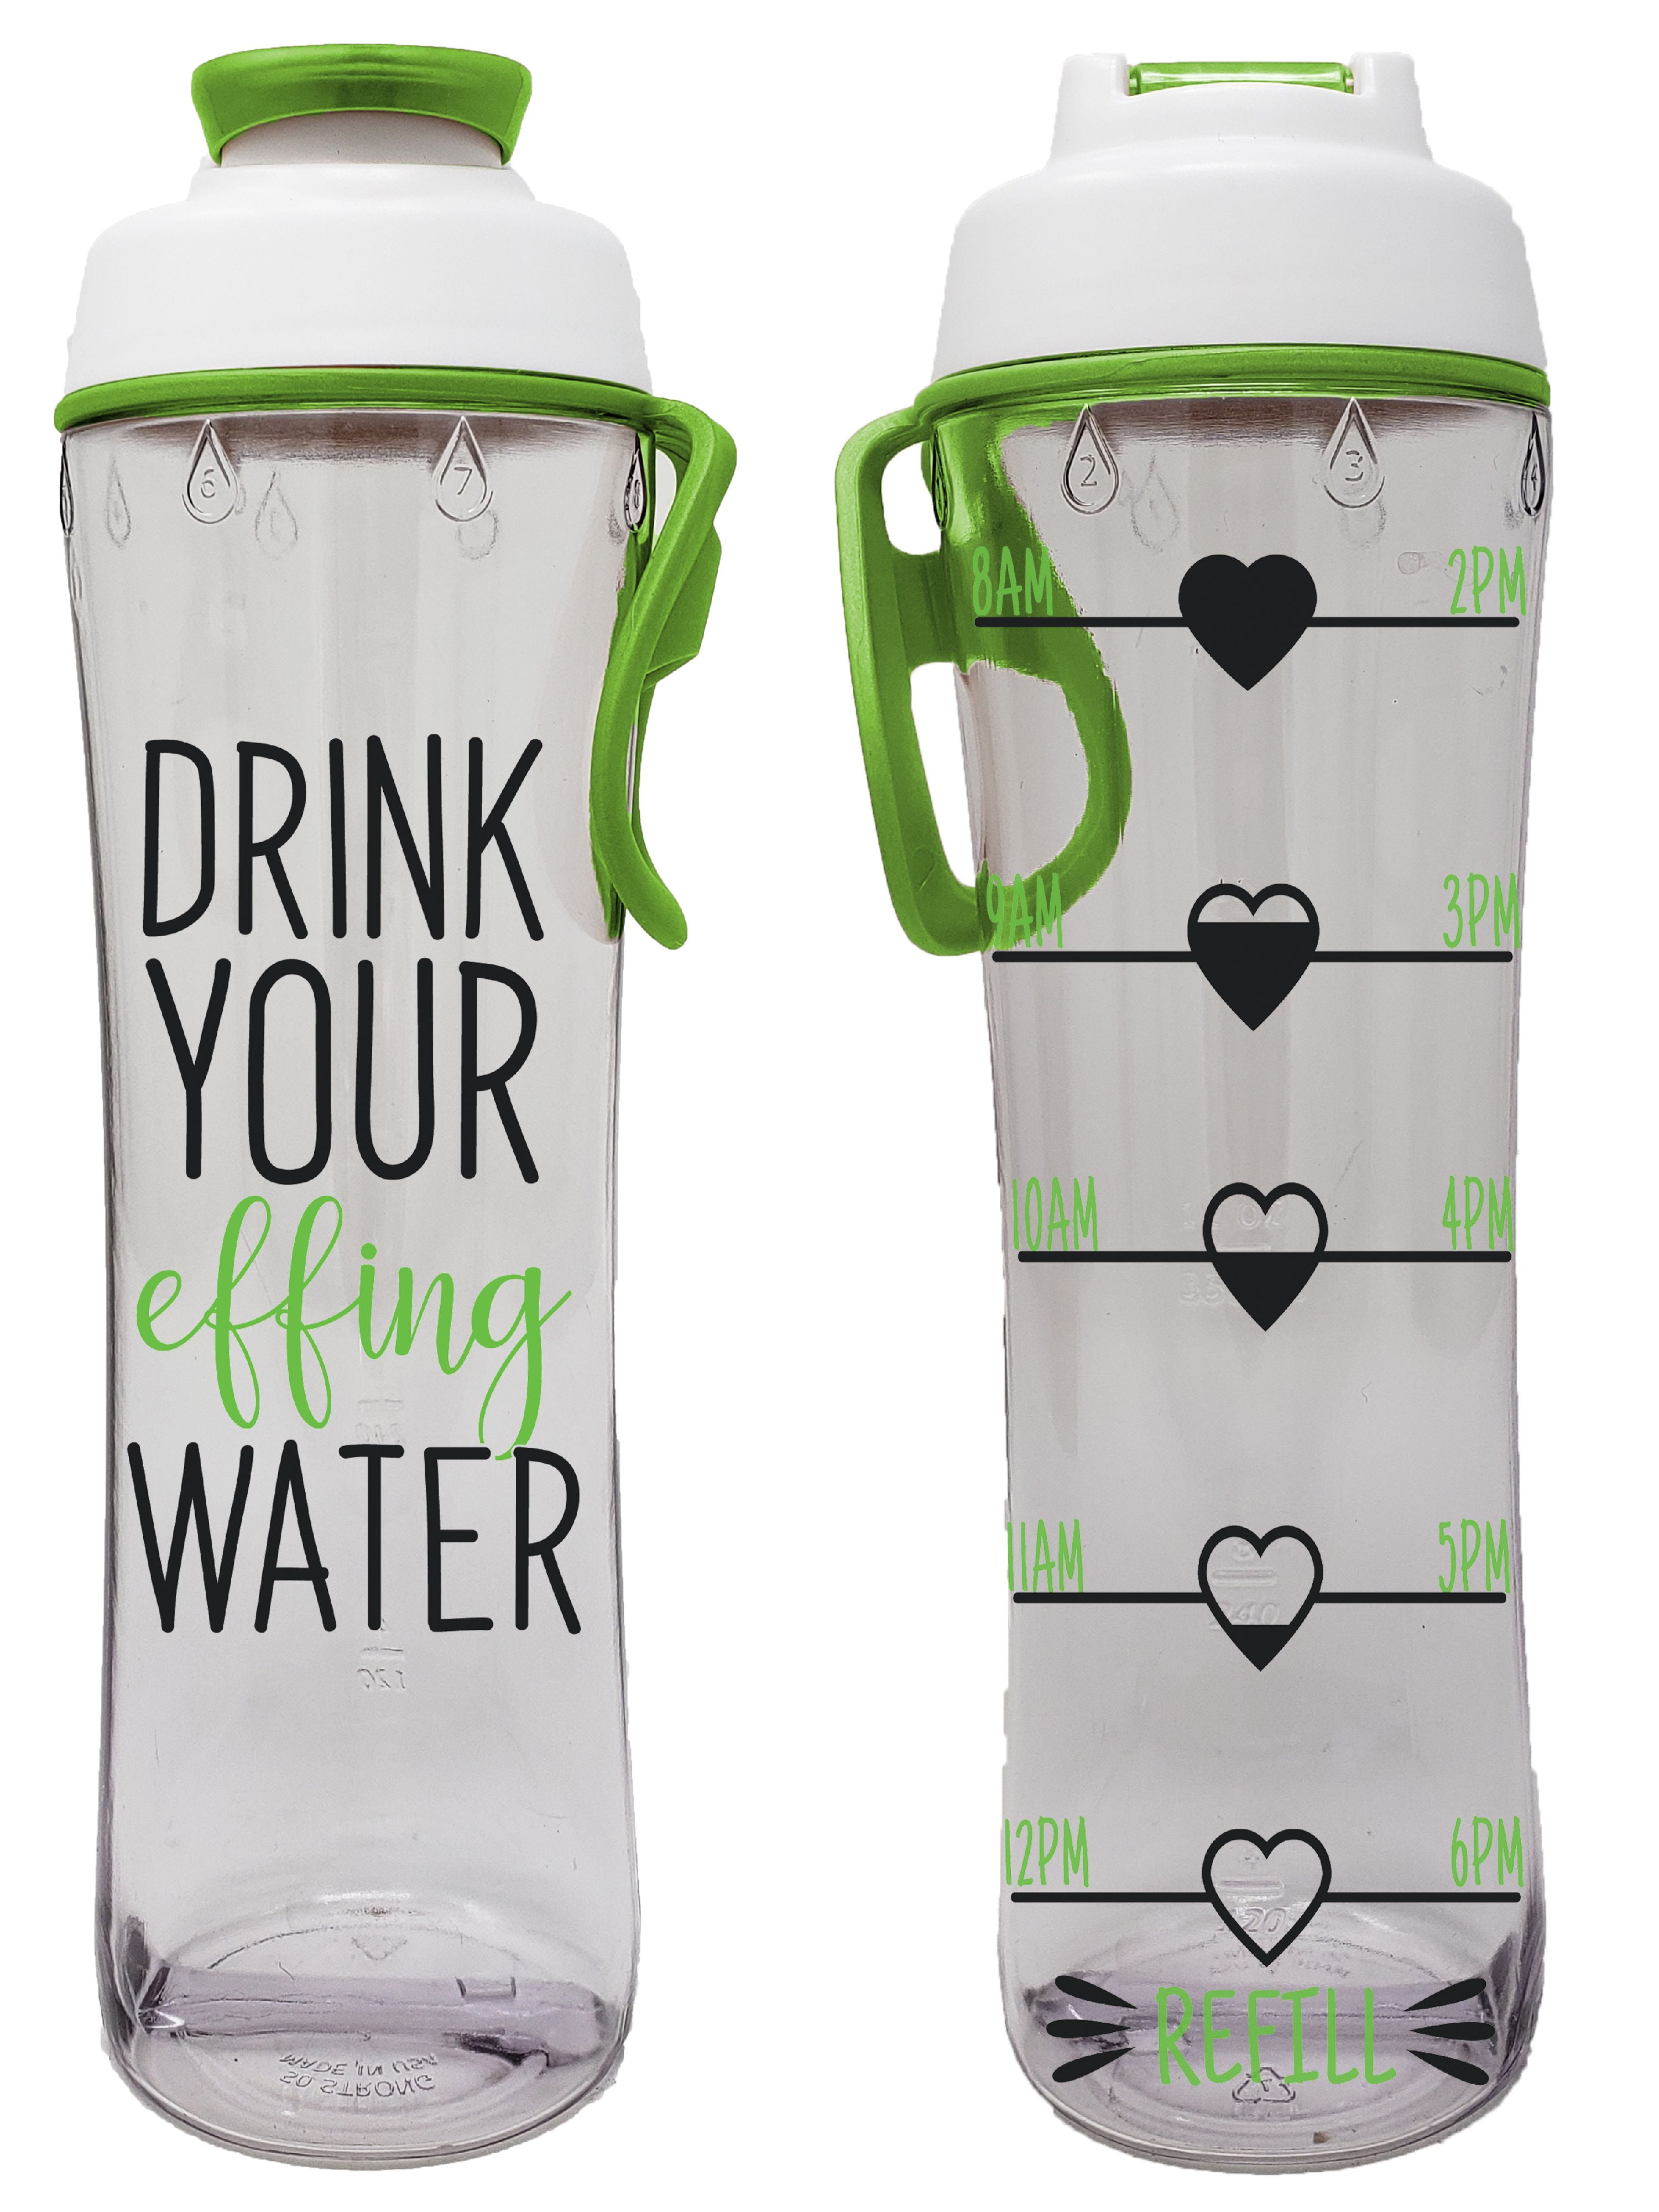 Fitness Workout Extra Large BPA-Free Water Bottle Leakproof with Flip Top Motivational Wristband Drink More Water Daily B4Life 1 Gallon Water Bottle with Time Marker 